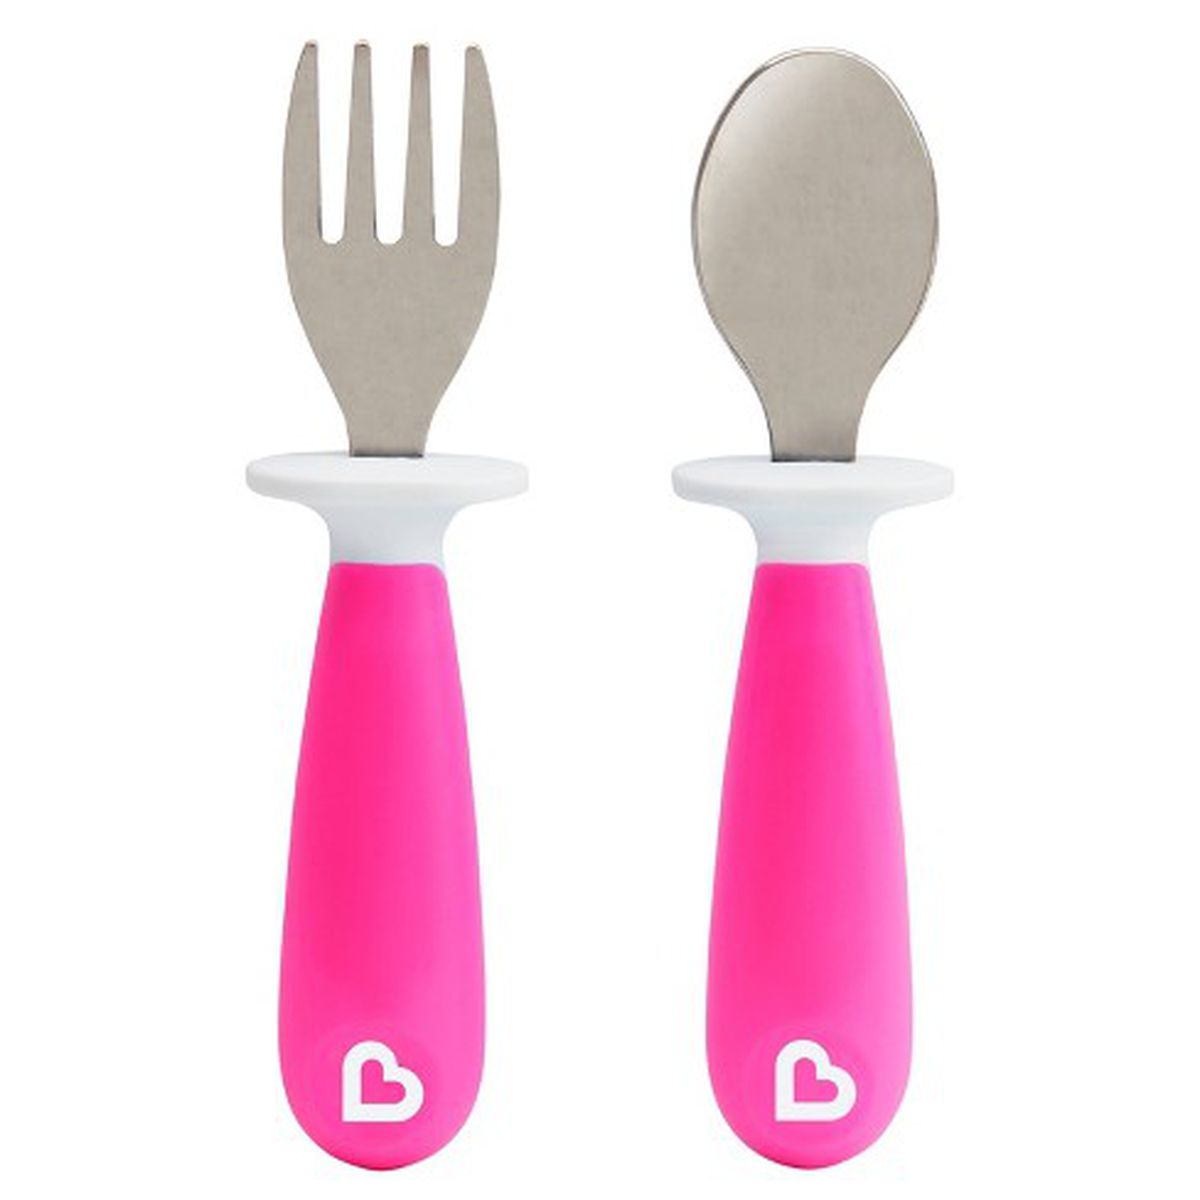 A small fork and spoon with pink handles